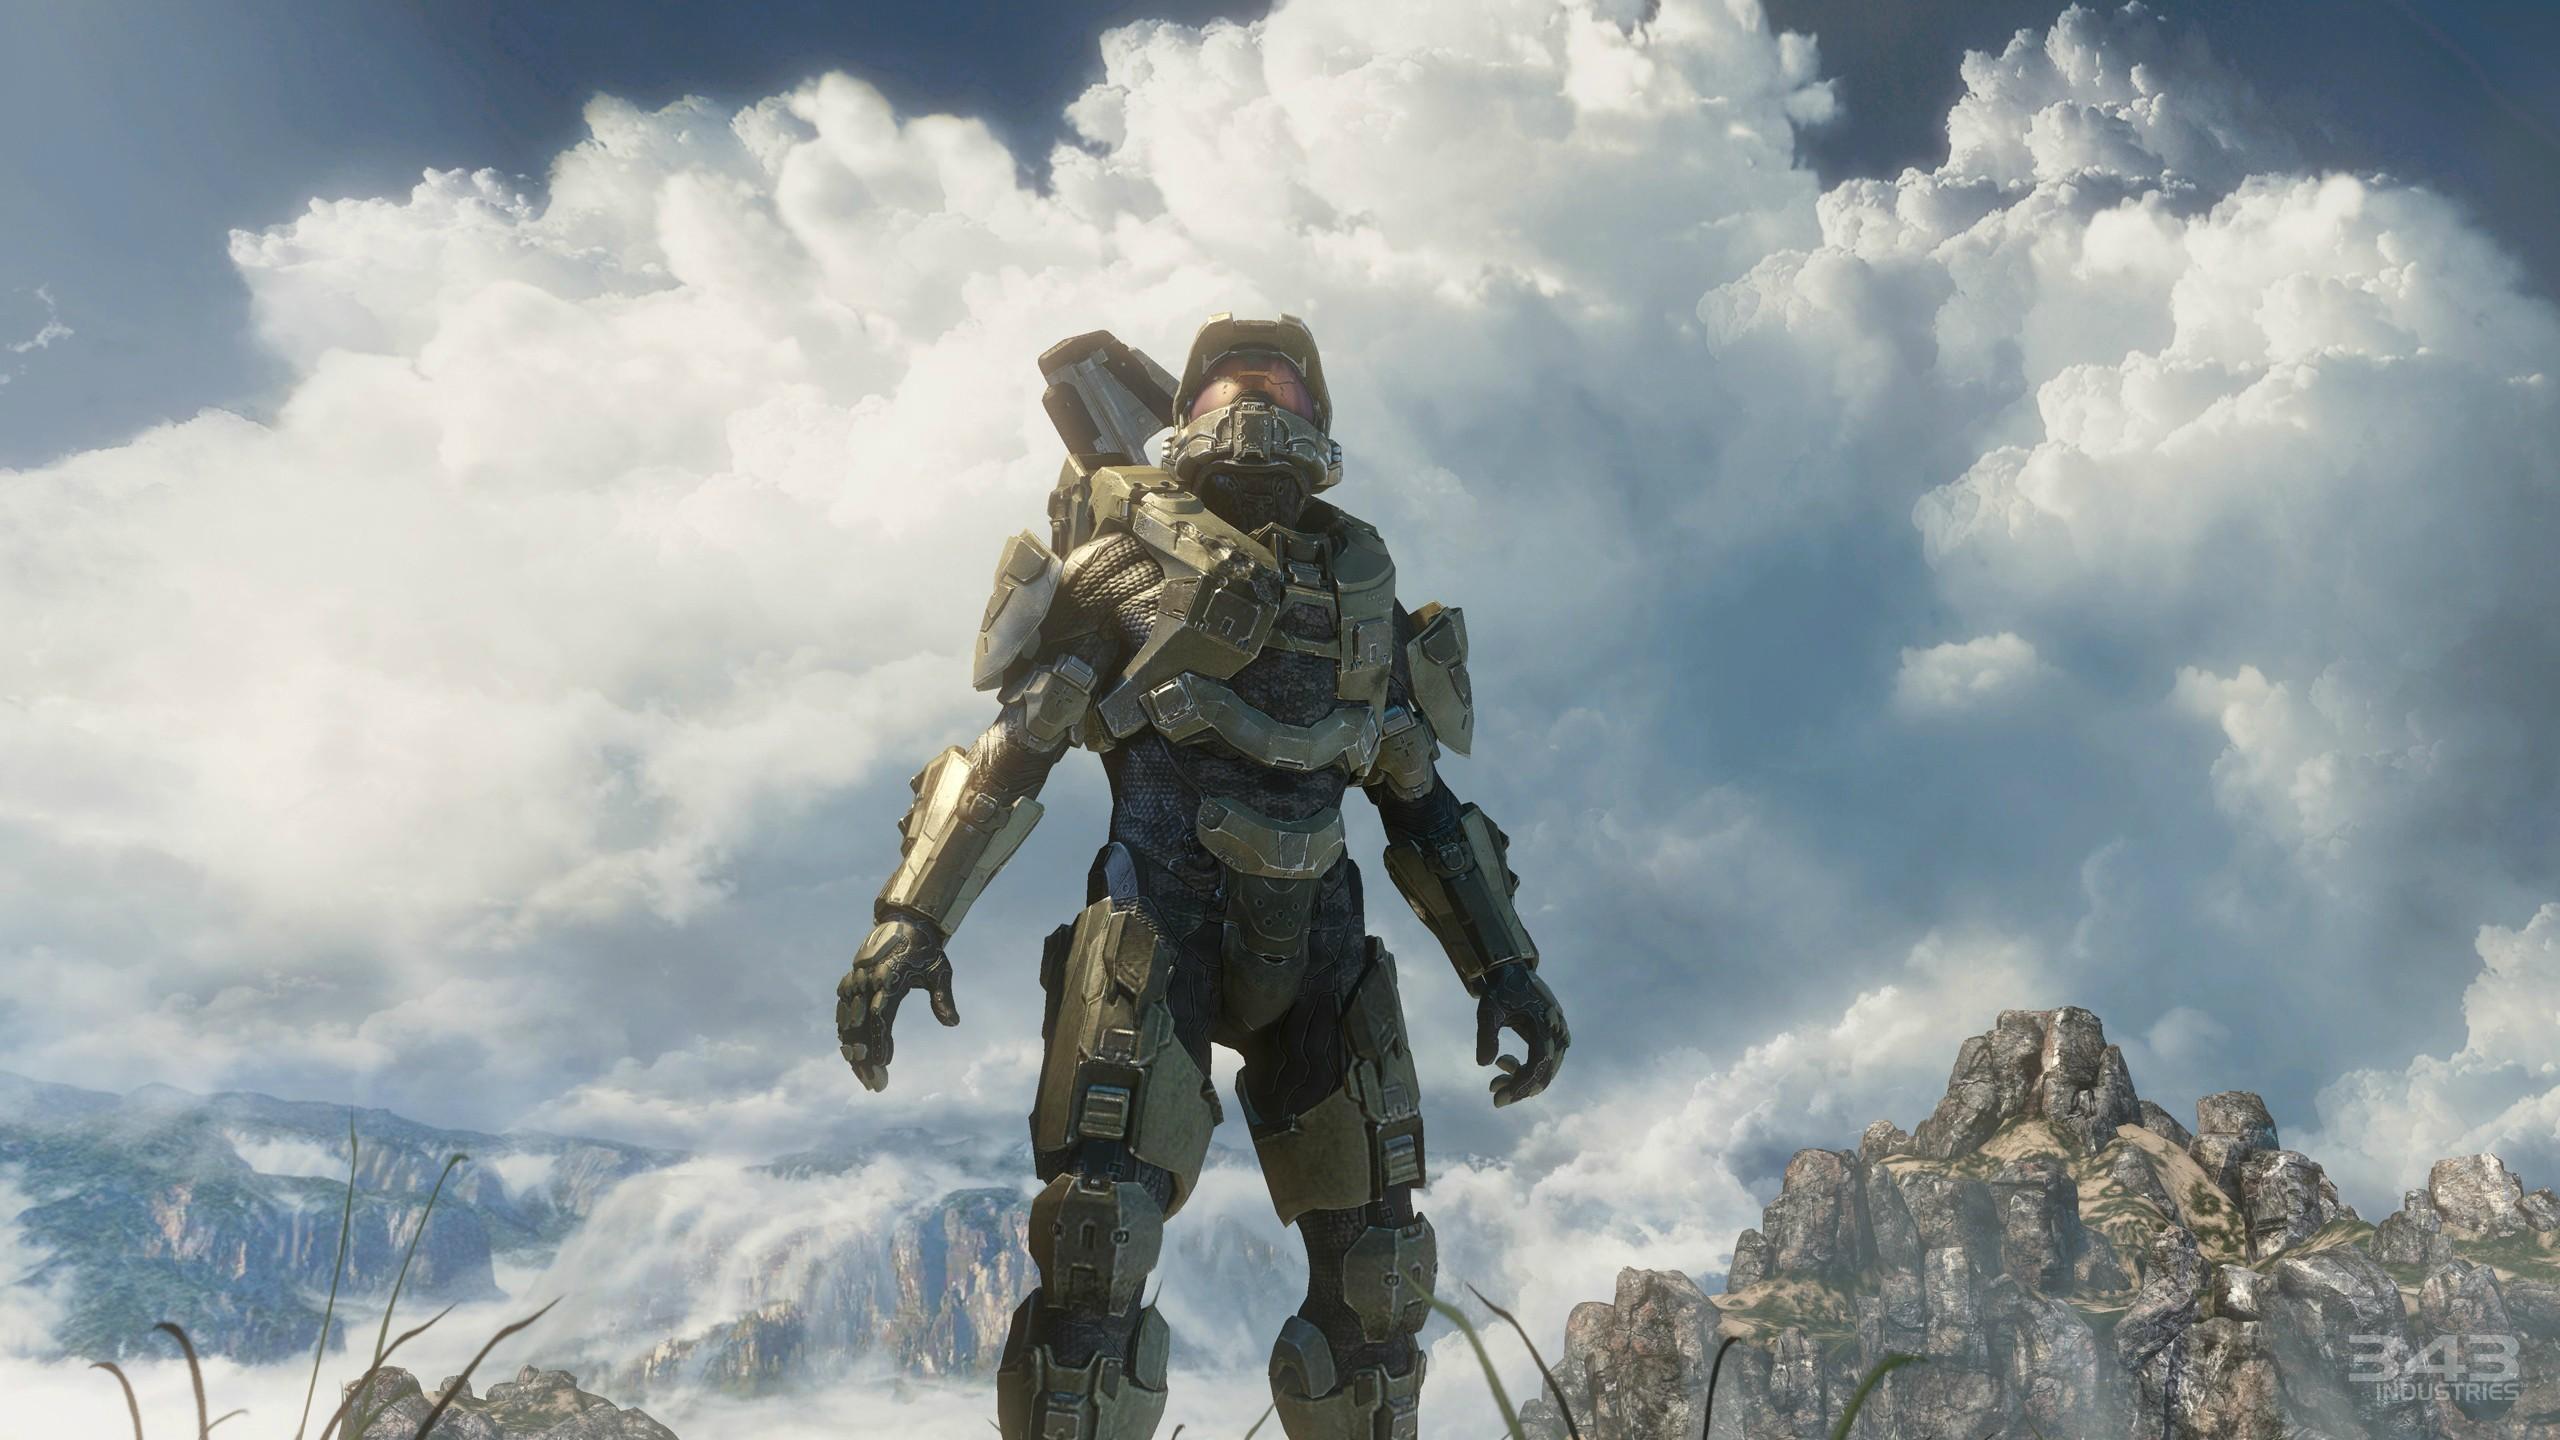 Best Game Games Video Xbox Halo Fresh New Hd Wallpaper 2560x1440px ...